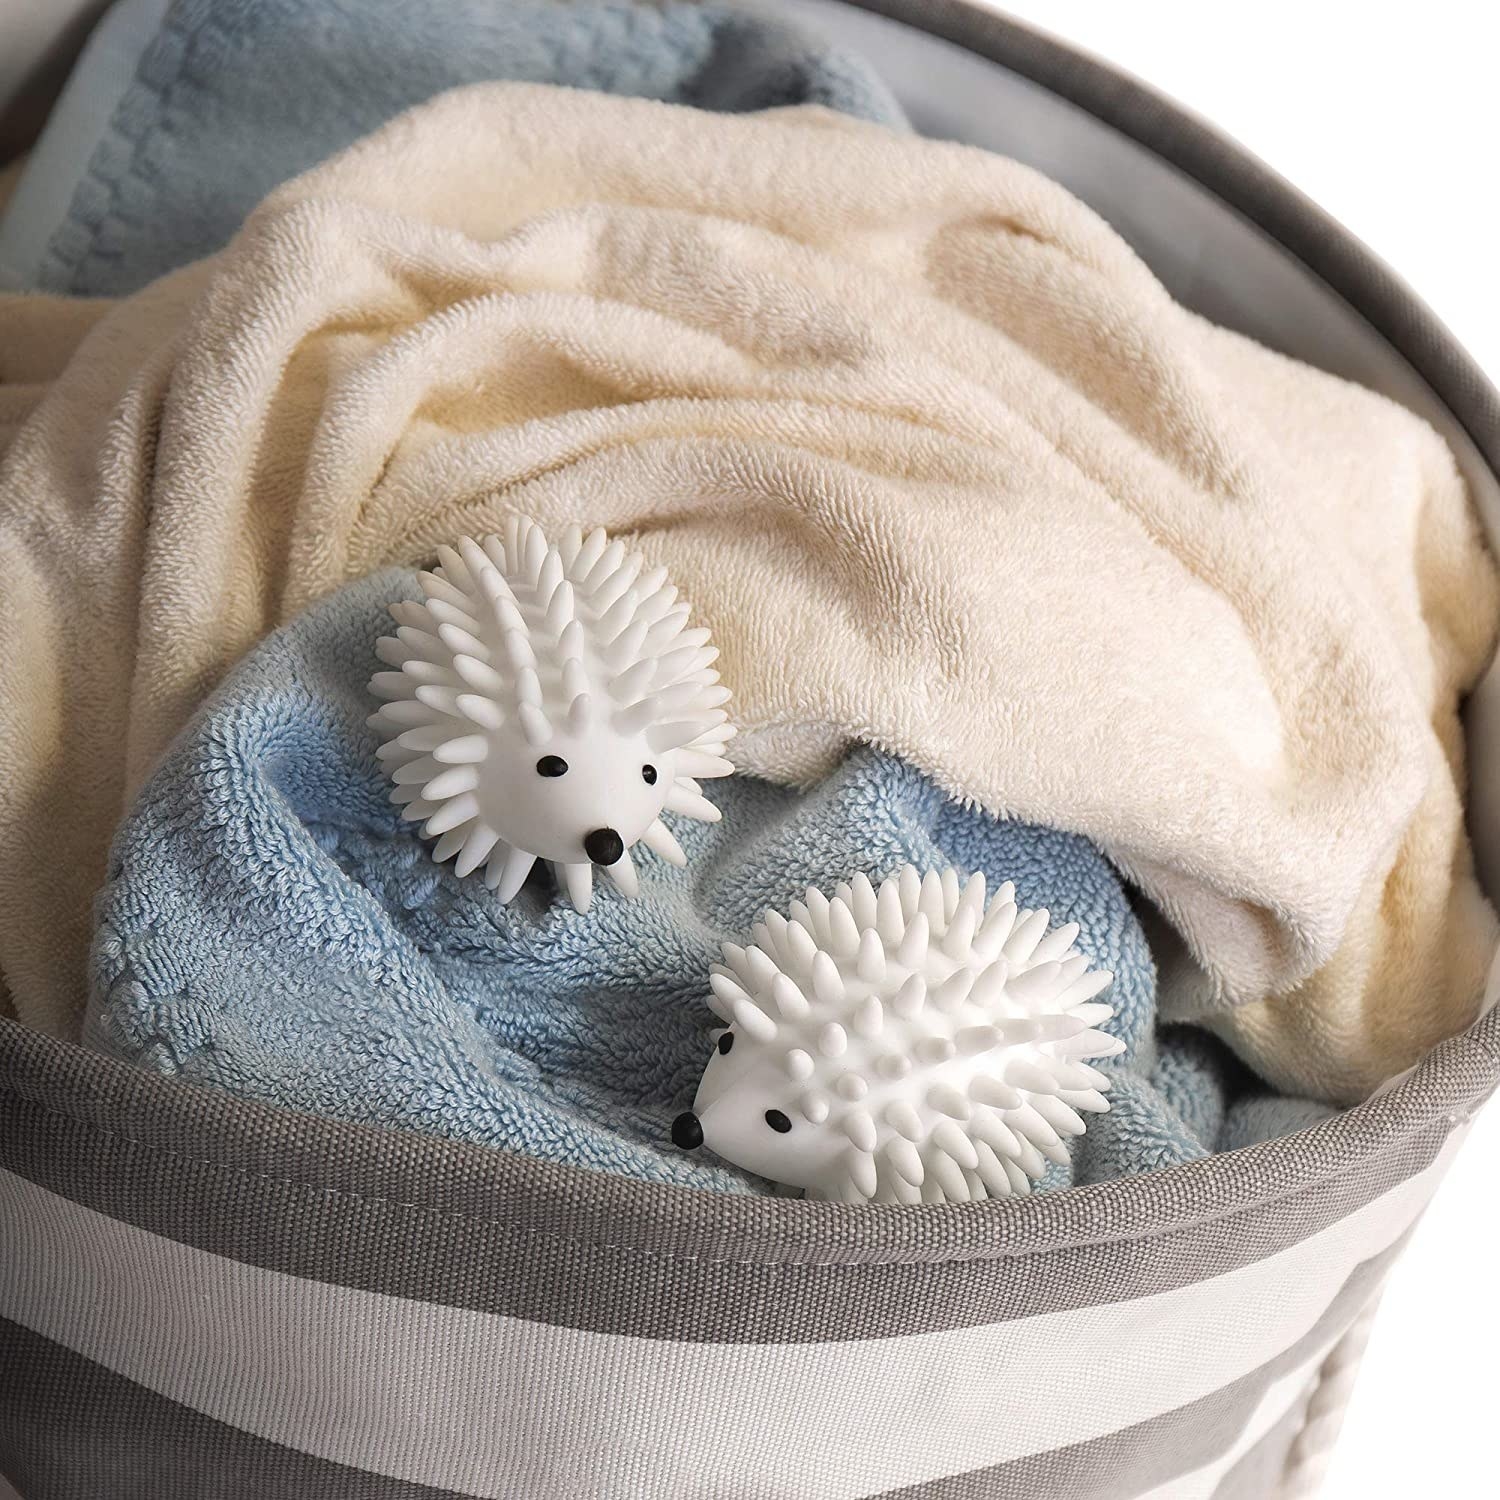 The two white hedgehogs in a pile of towels